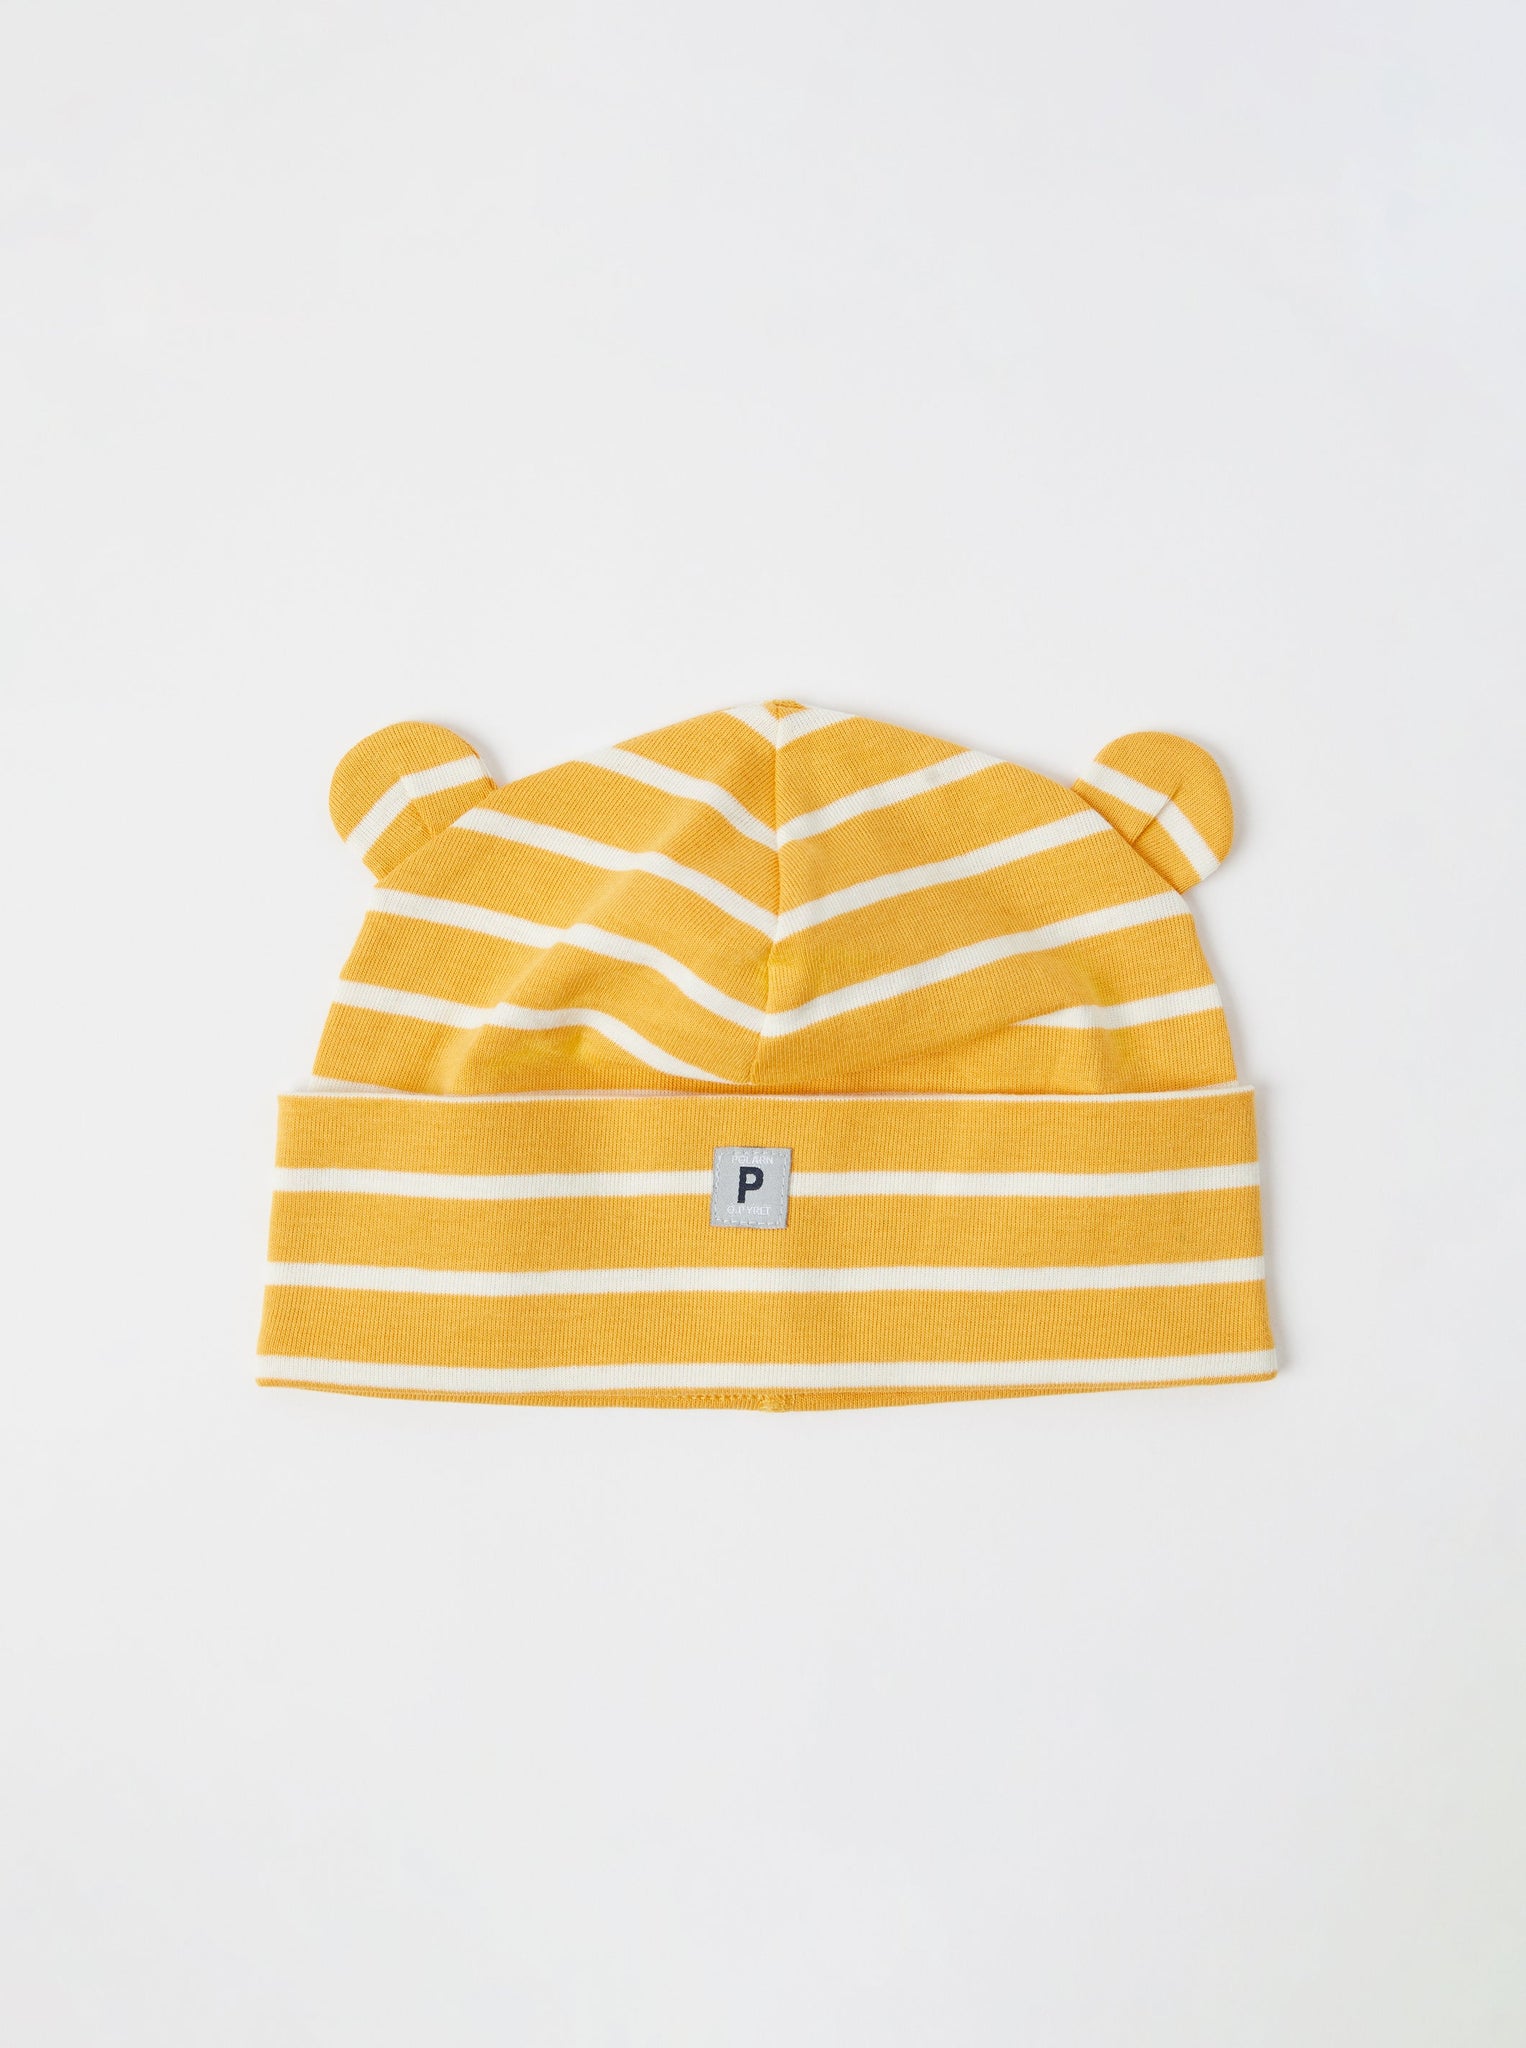 Organic Cotton Yellow Baby Beanie Hat from the Polarn O. Pyret babywear collection. Clothes made using sustainably sourced materials.